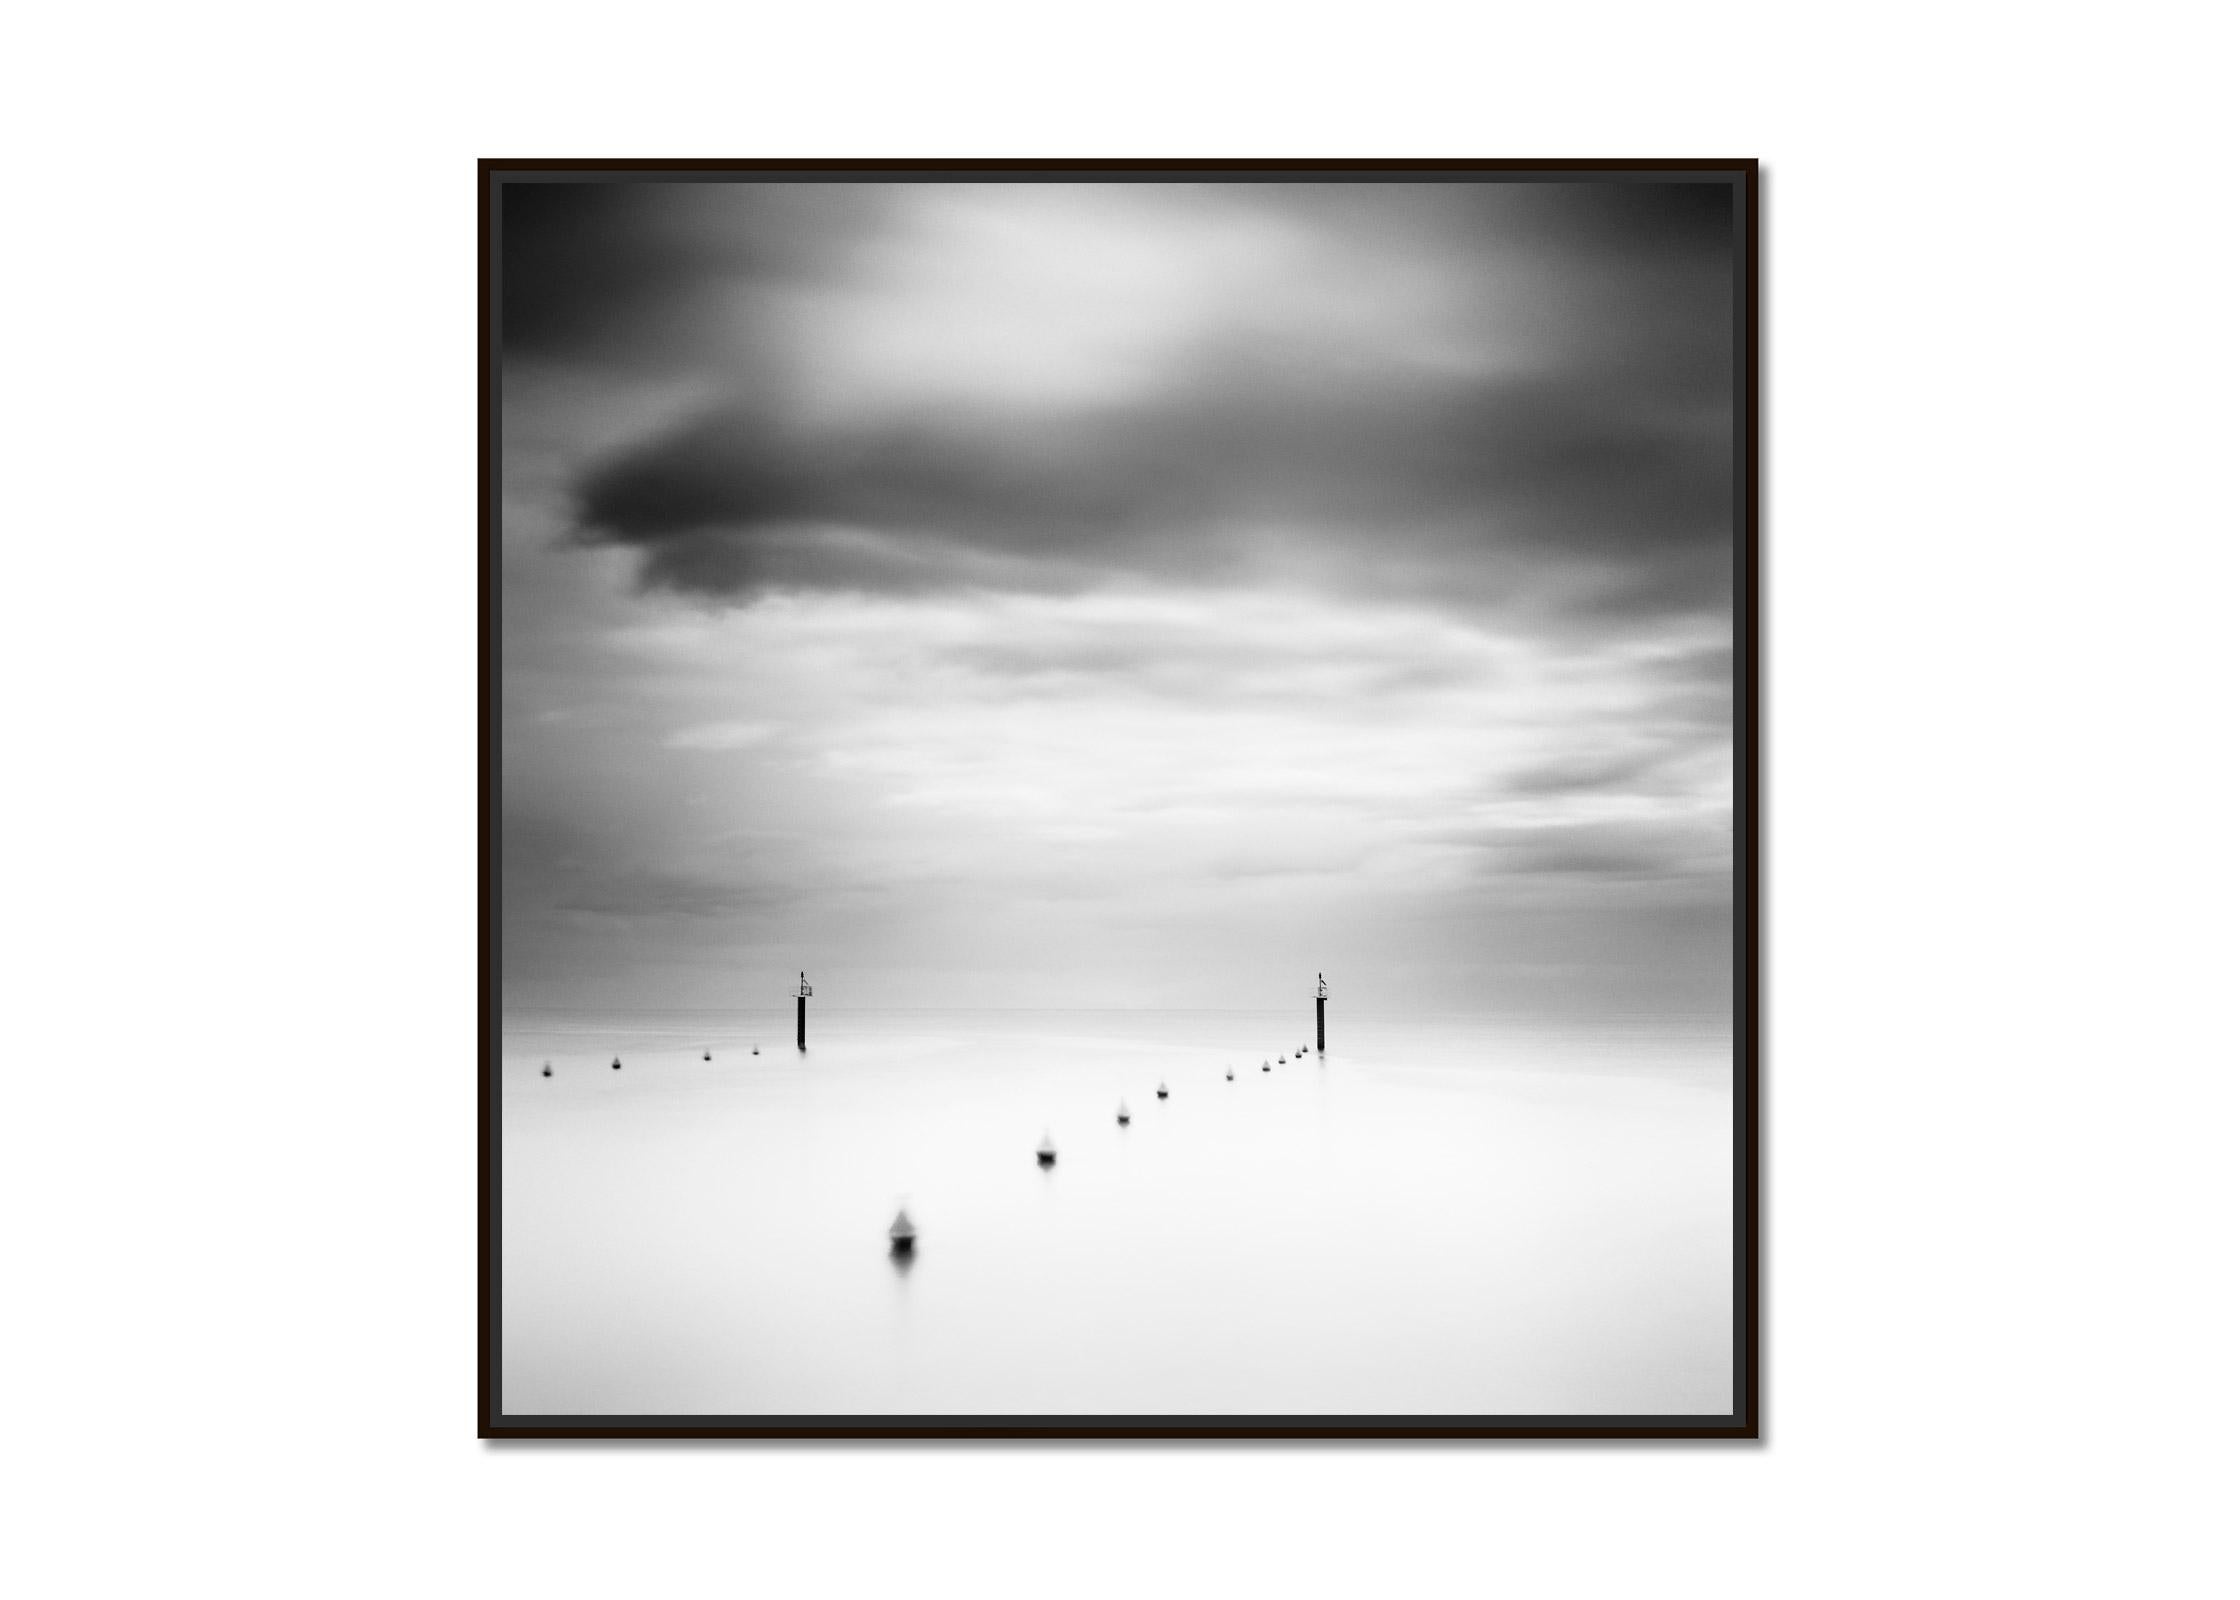 Storm in harbor exit, Greece, Black and White waterscape photography art print - Photograph by Gerald Berghammer